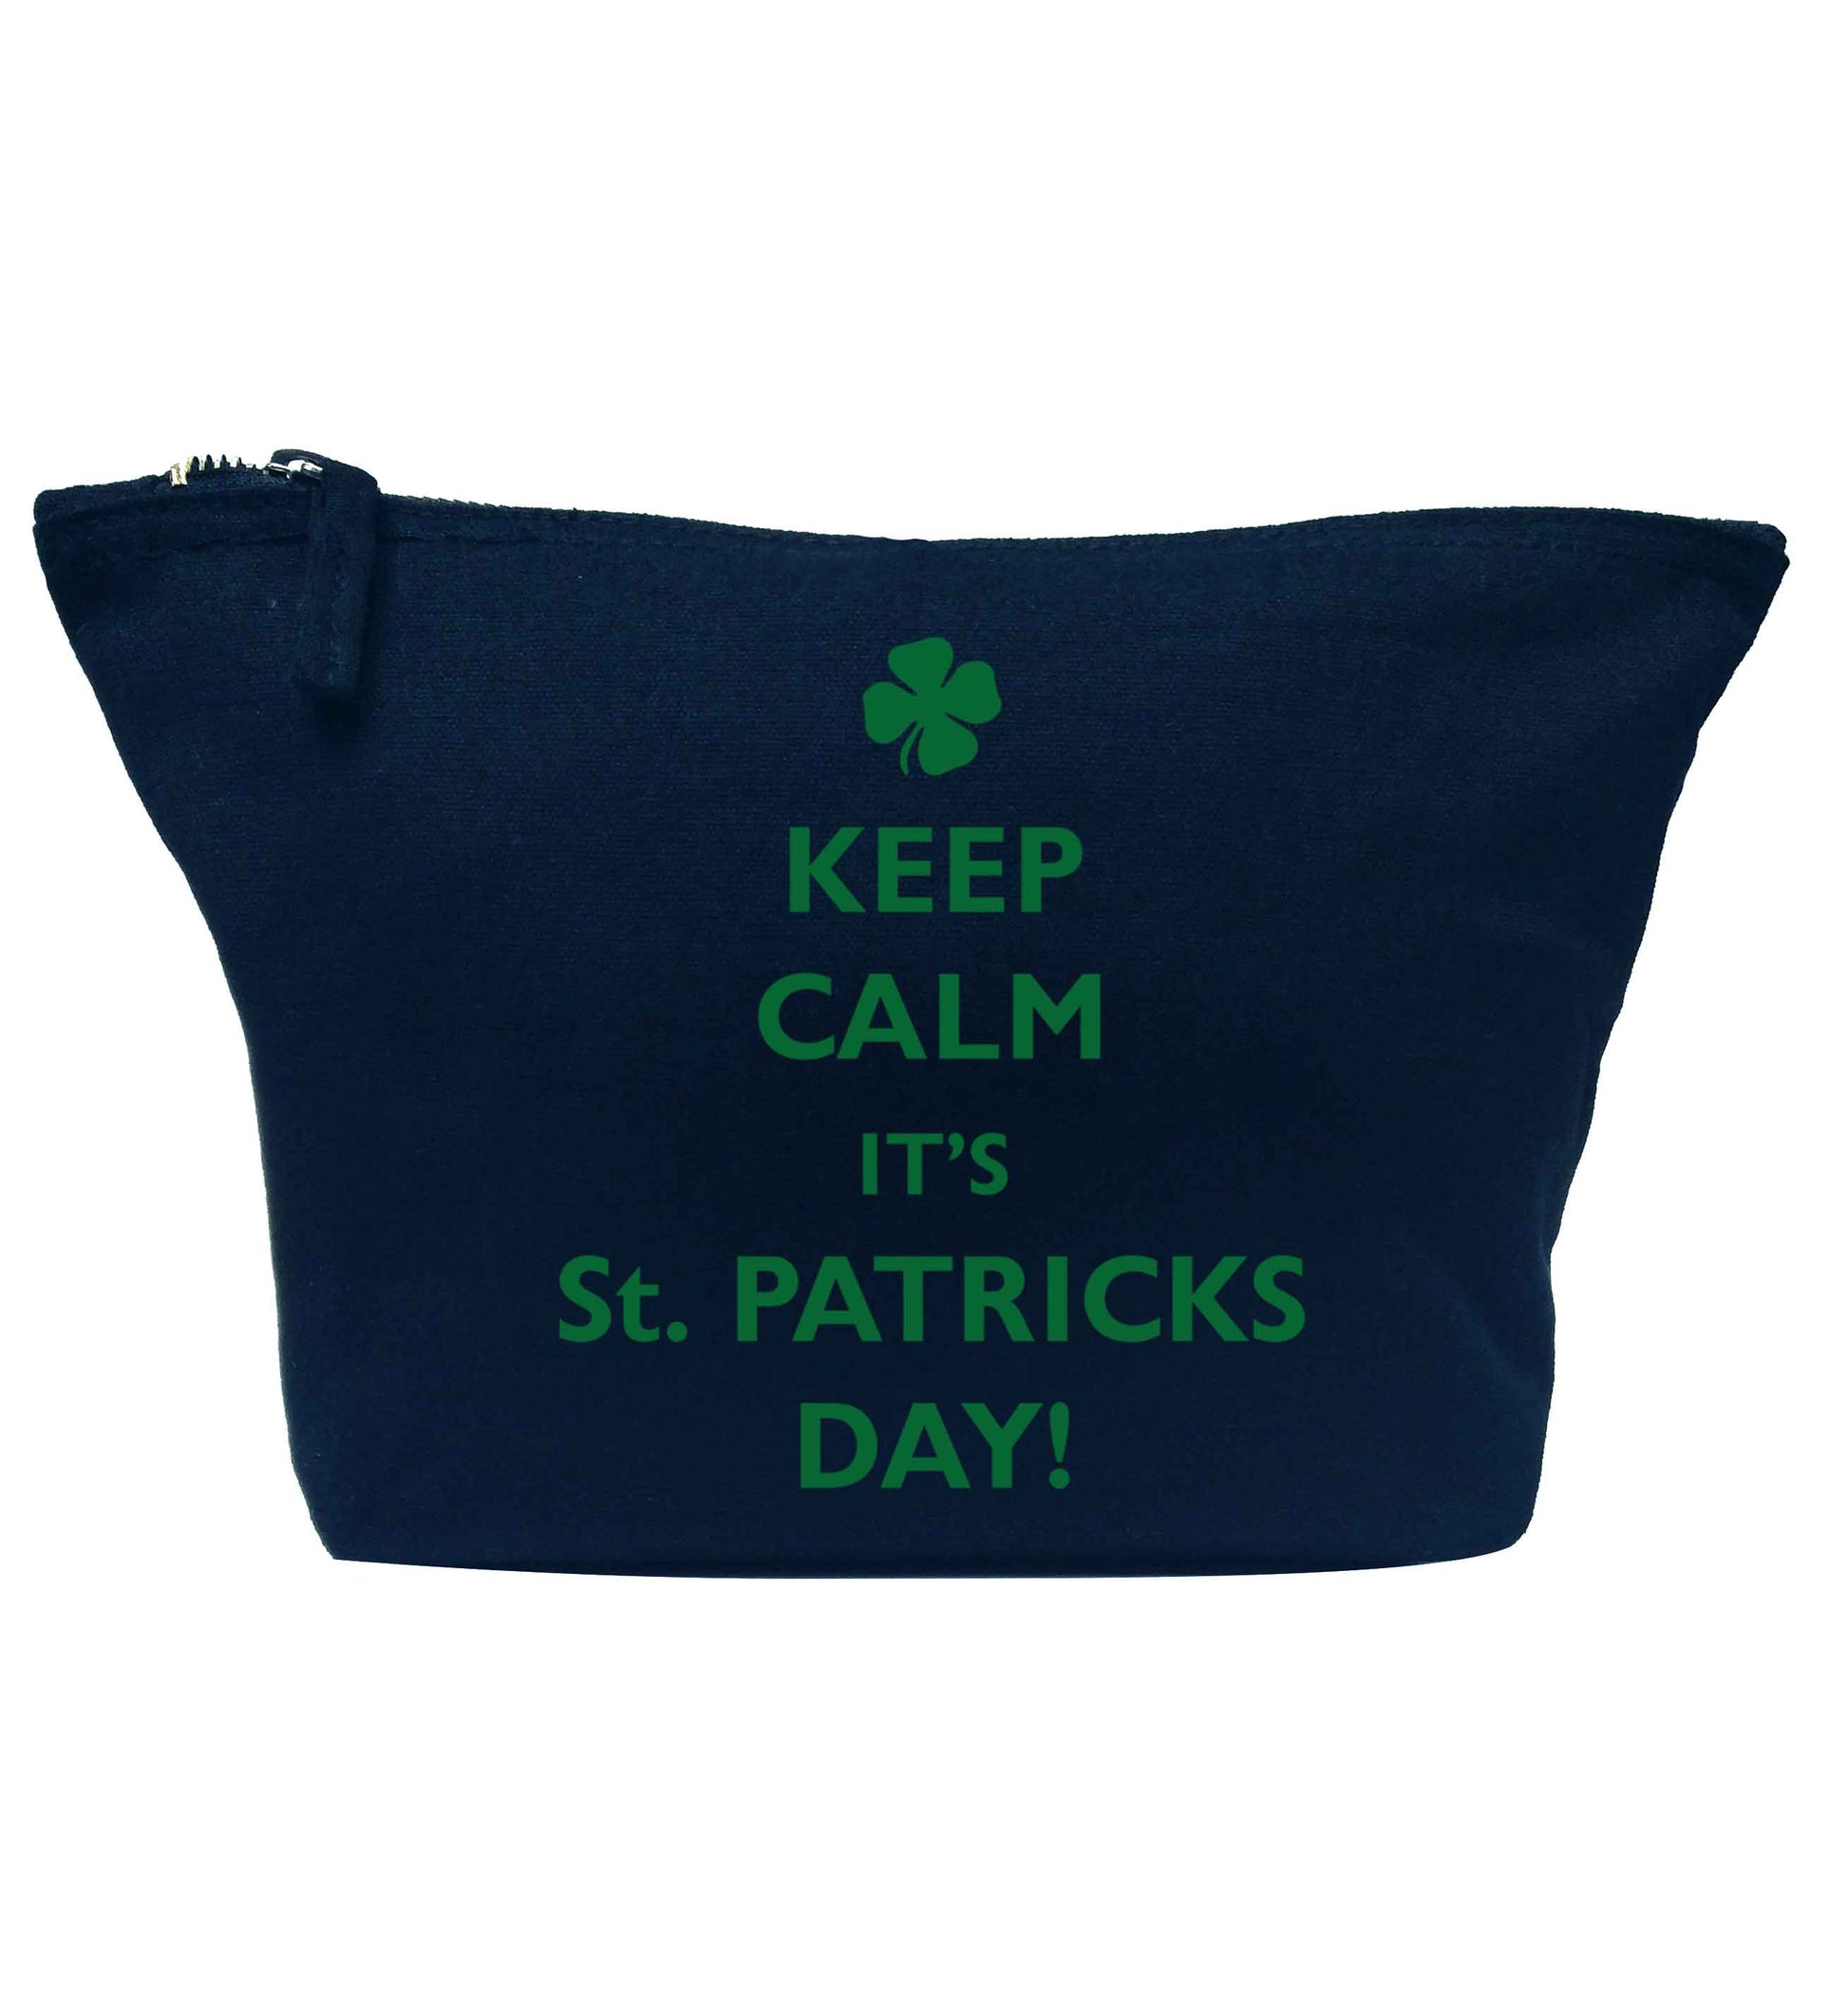 I can't keep calm it's St.Patricks day navy makeup bag